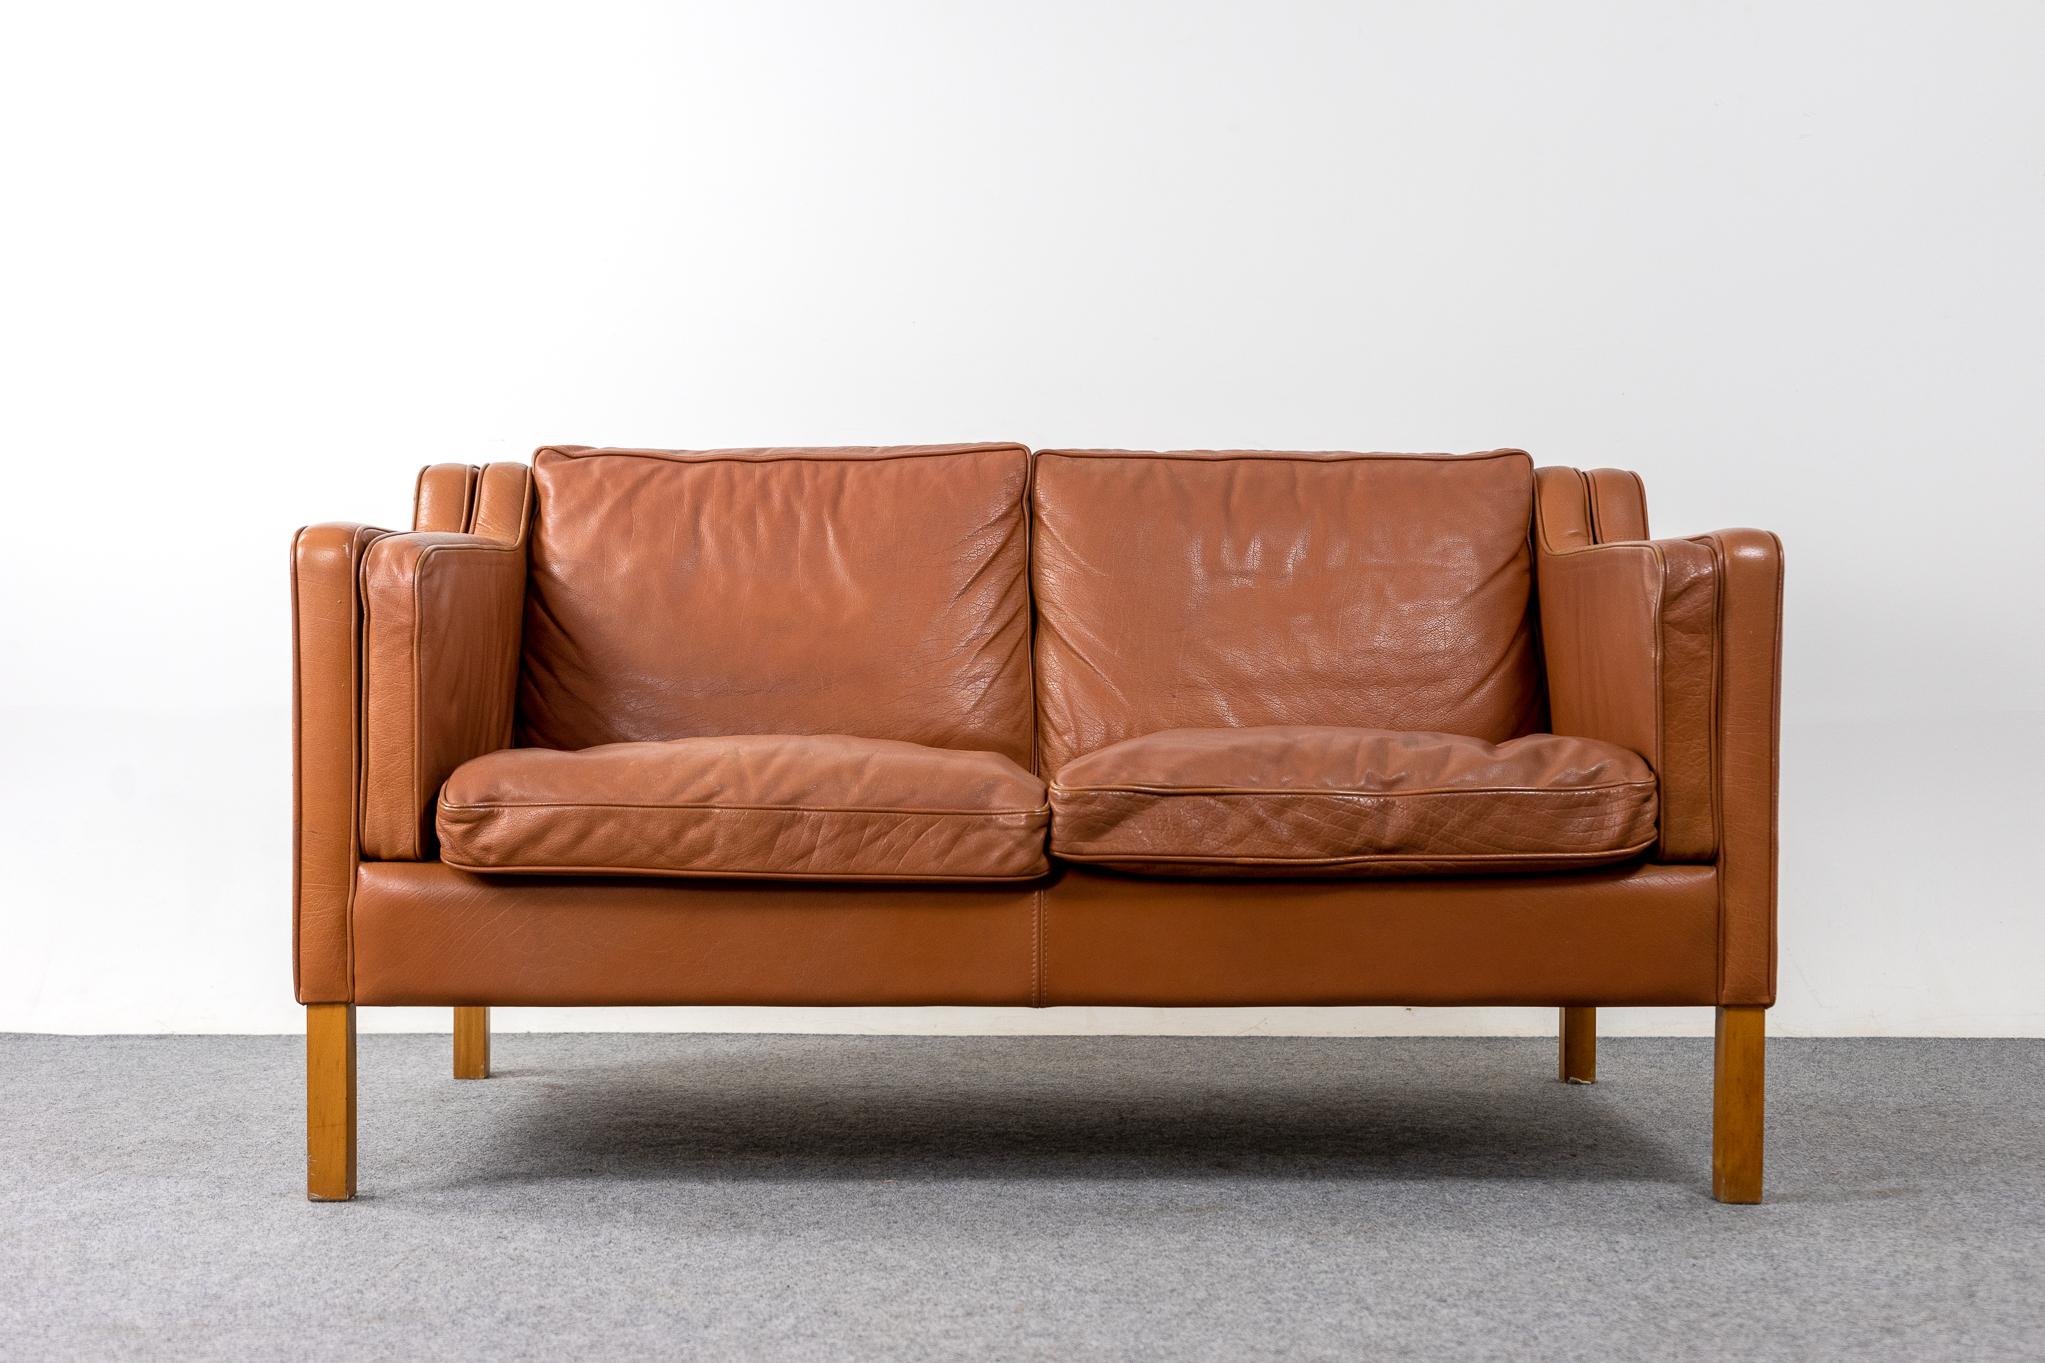 Leather loveseat by Stouby, circa 1960's. Tan soft and supple leather that is durable to ensure years of use and enjoyment. Compact footprint make this the perfect seating solution for urban dwellers in cozy lofts or condos. Great patina! 

Please